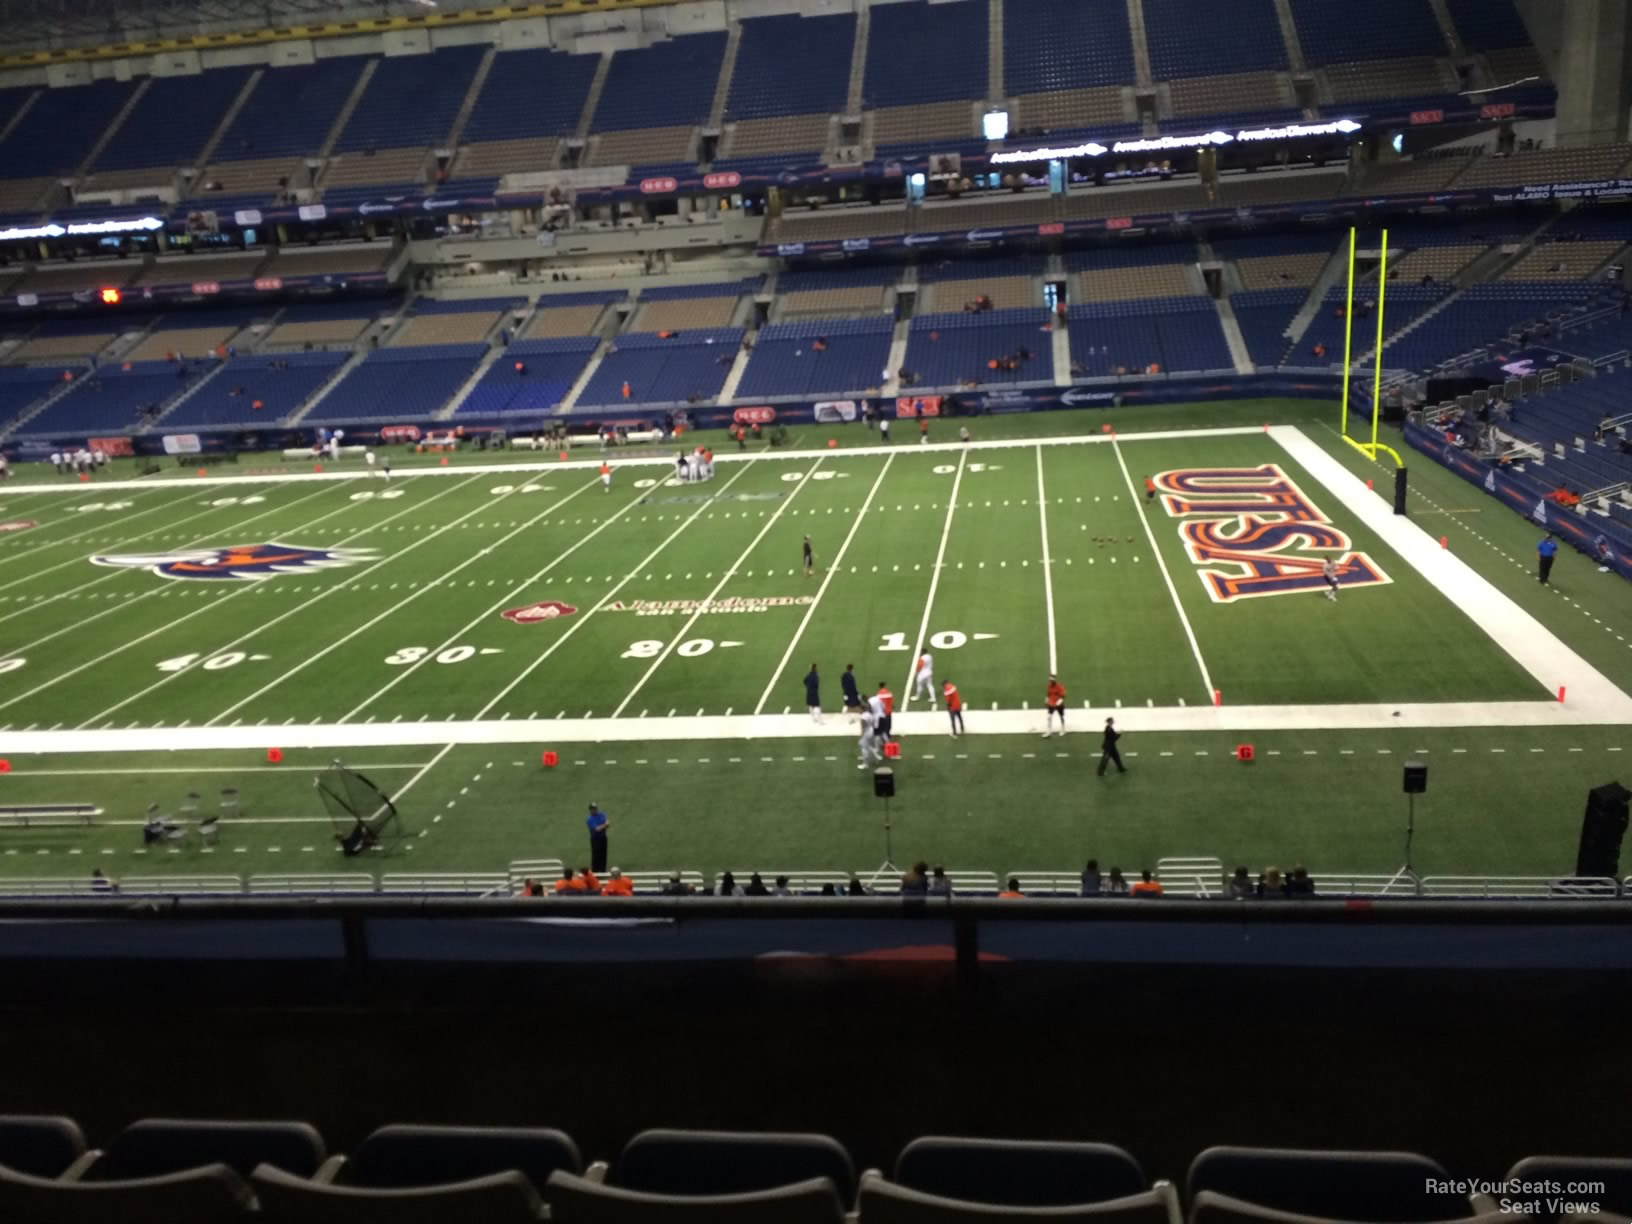 section 231, row 5 seat view  for football - alamodome